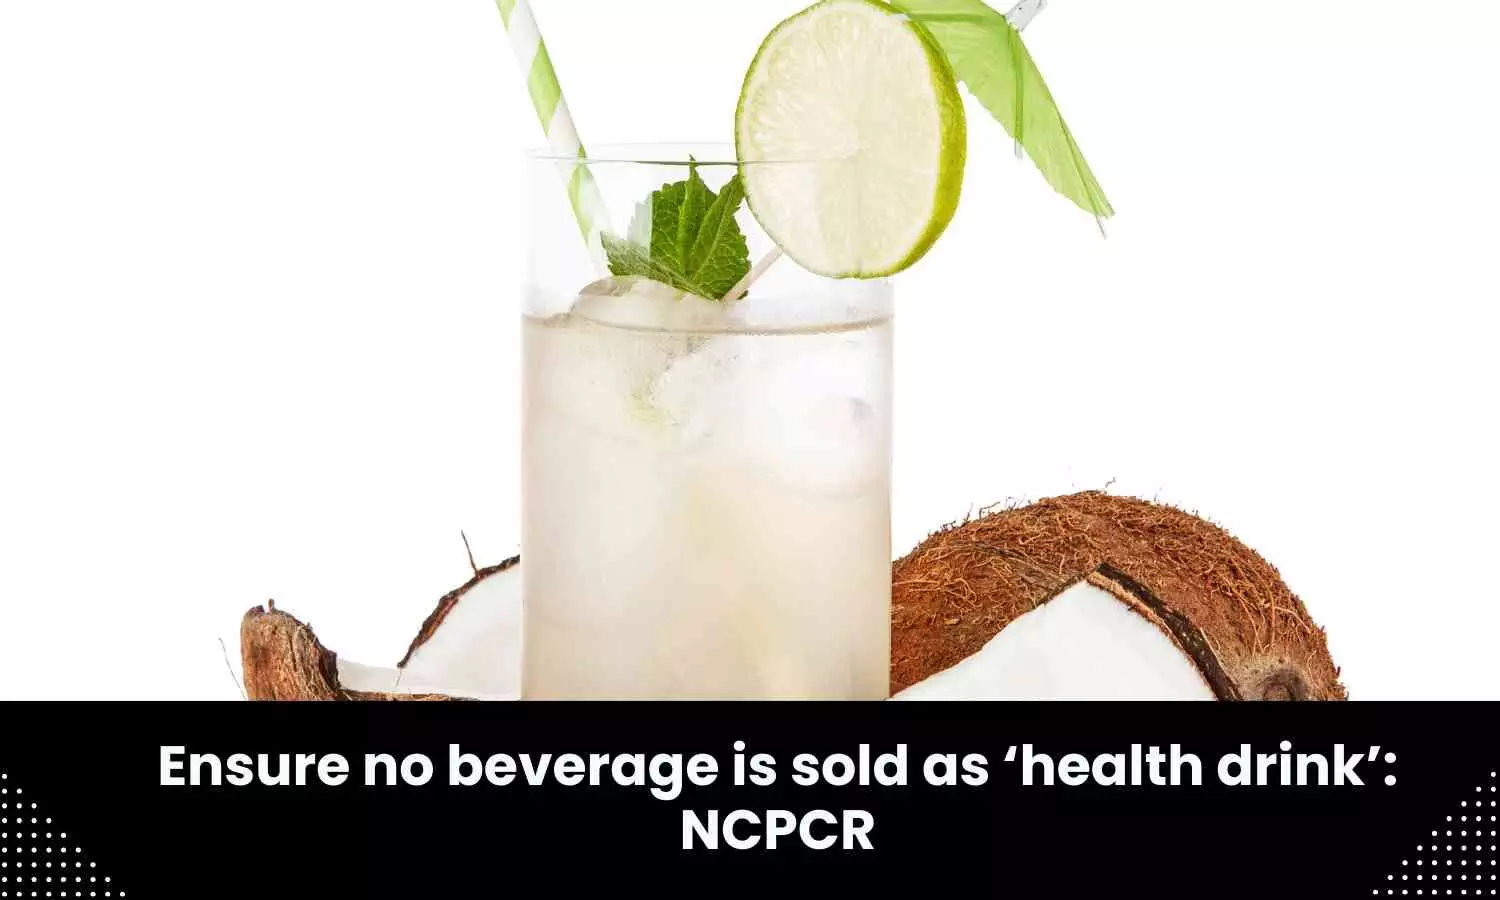 No drink, beverages should be sold under category of health drink in stores, shops, says NCPCR